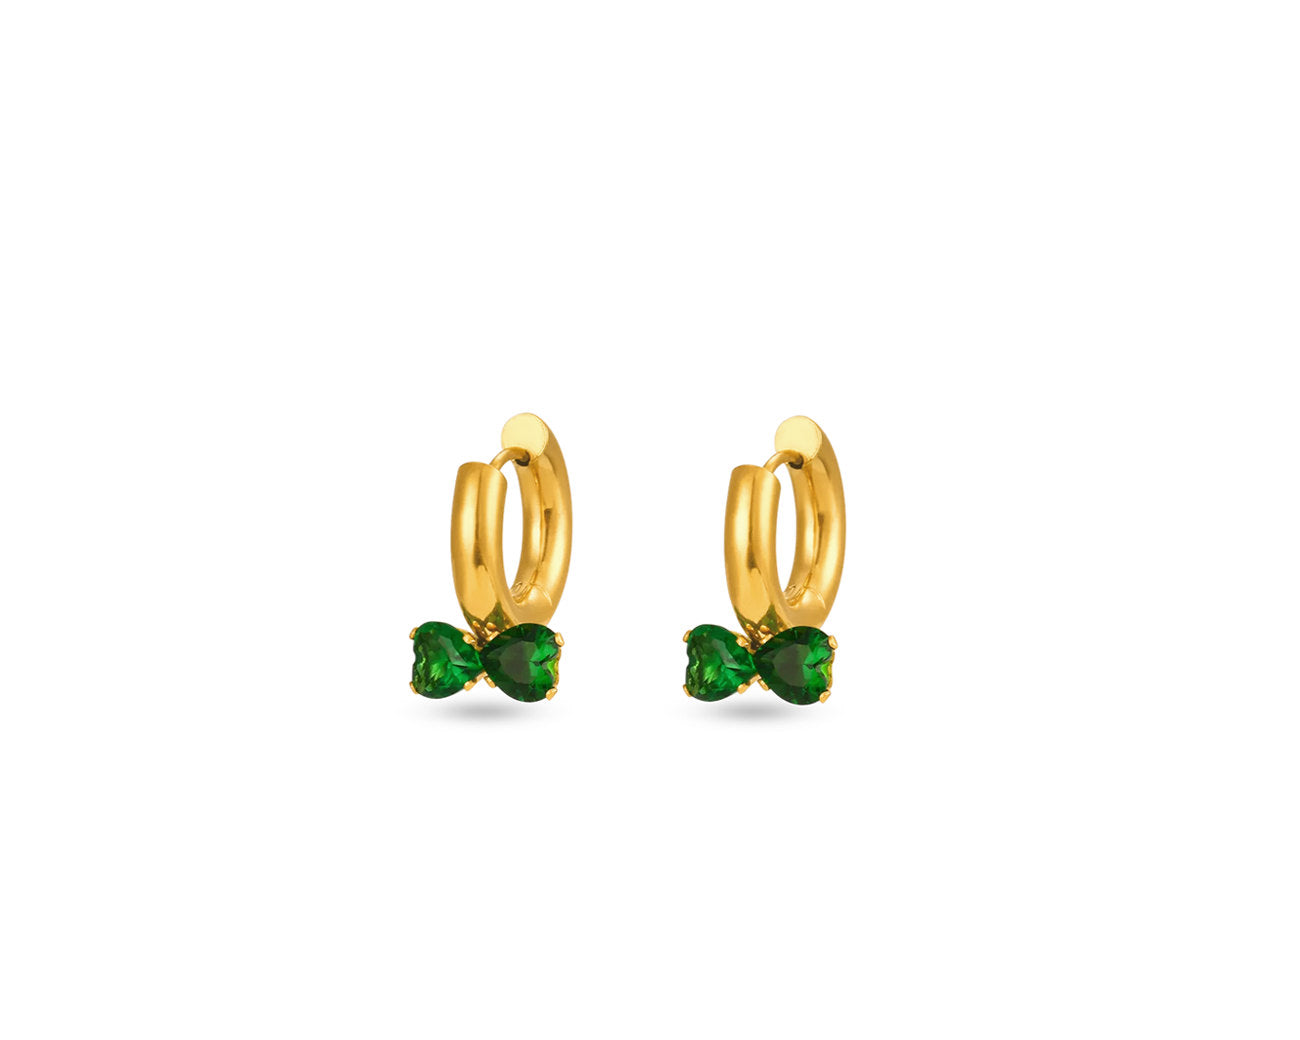 FAX Jewelry | Hearts Aflutter gold huggie hoop earrings | 18 karat gold plated stainless steel with two emerald green heart-shaped stones